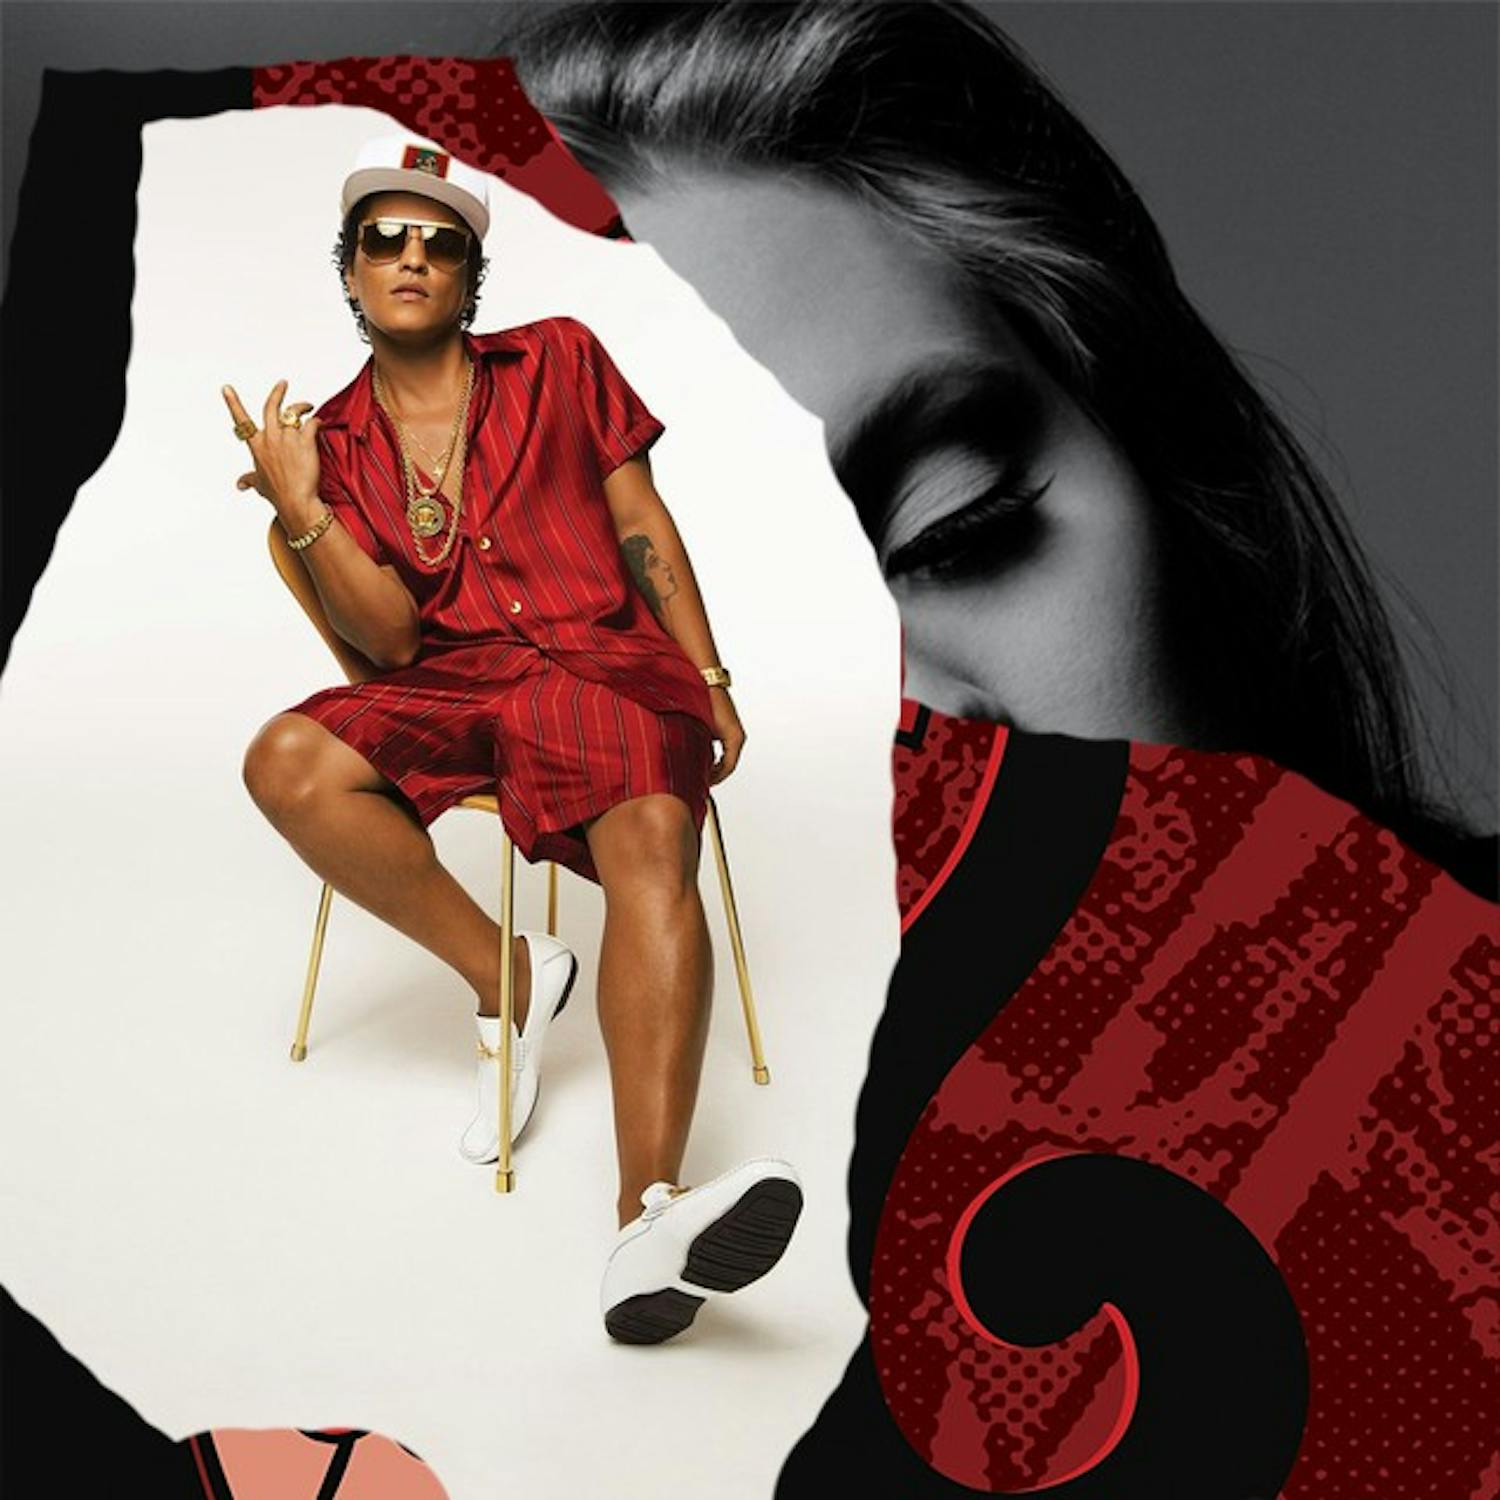 Collage includes album covers from Pop albums from Bruno Mars, Maroon 5 AND Adele.